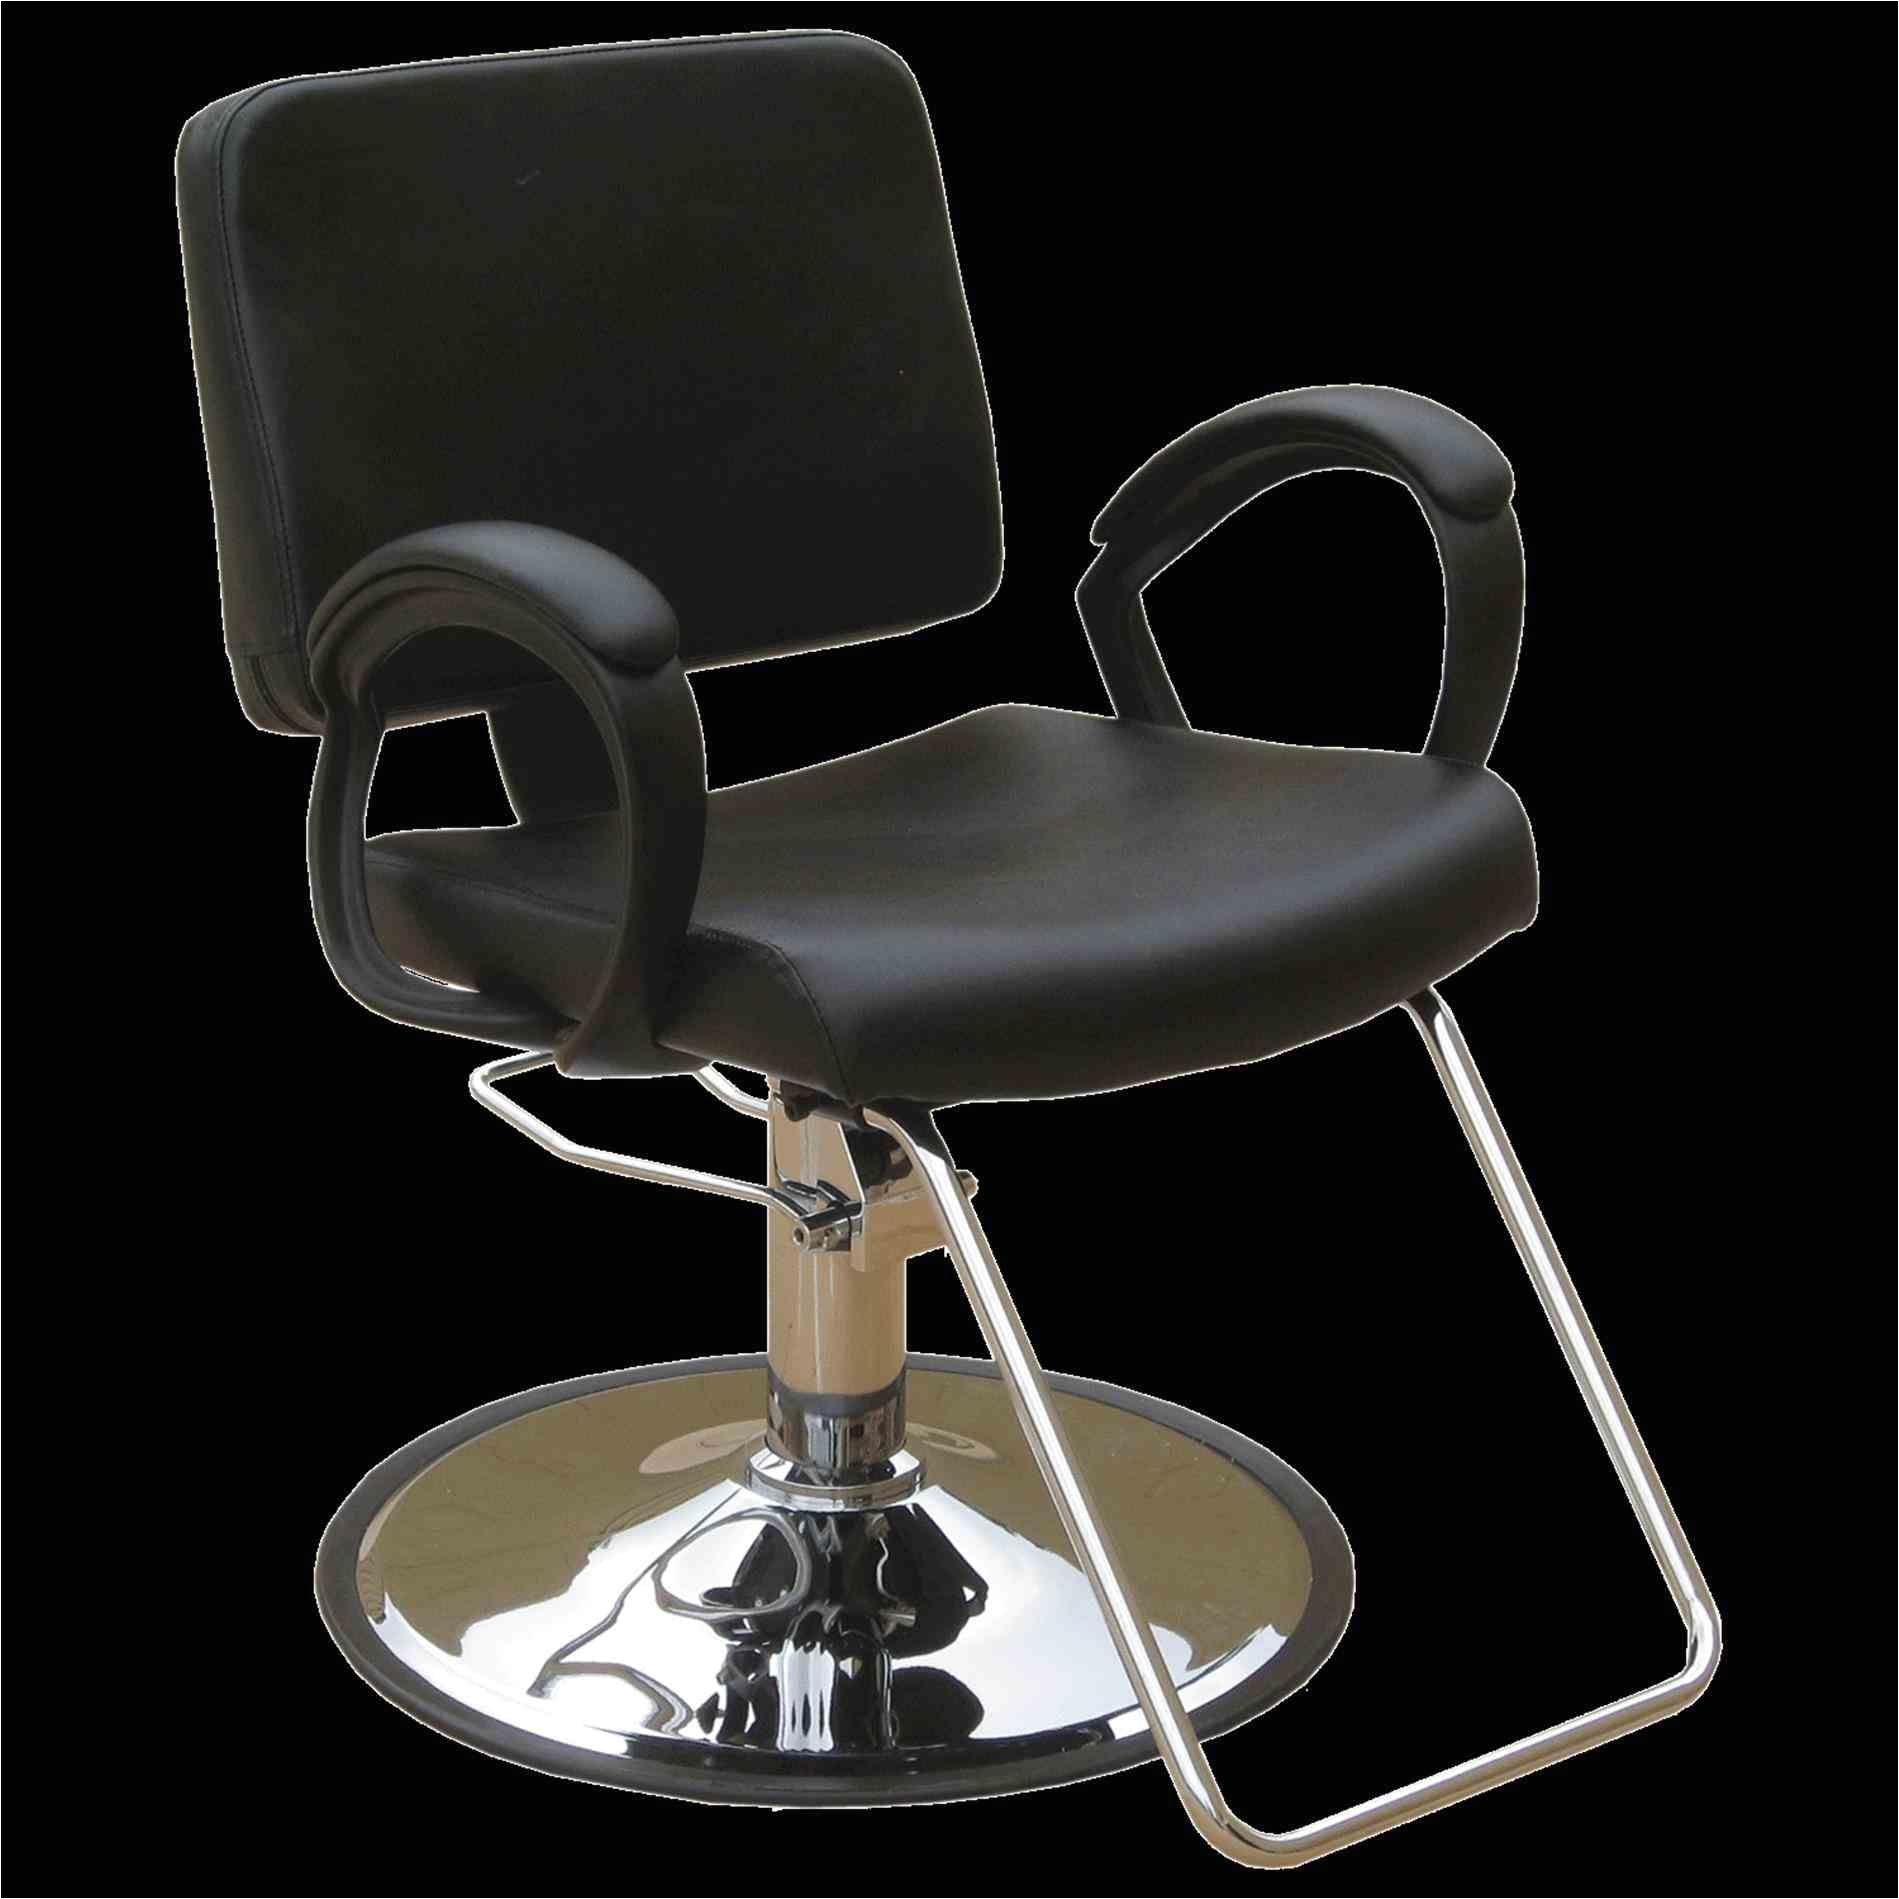 full size of chair styling threading amazoncom salon chairs for sale cheap all purpose hydraulic barber